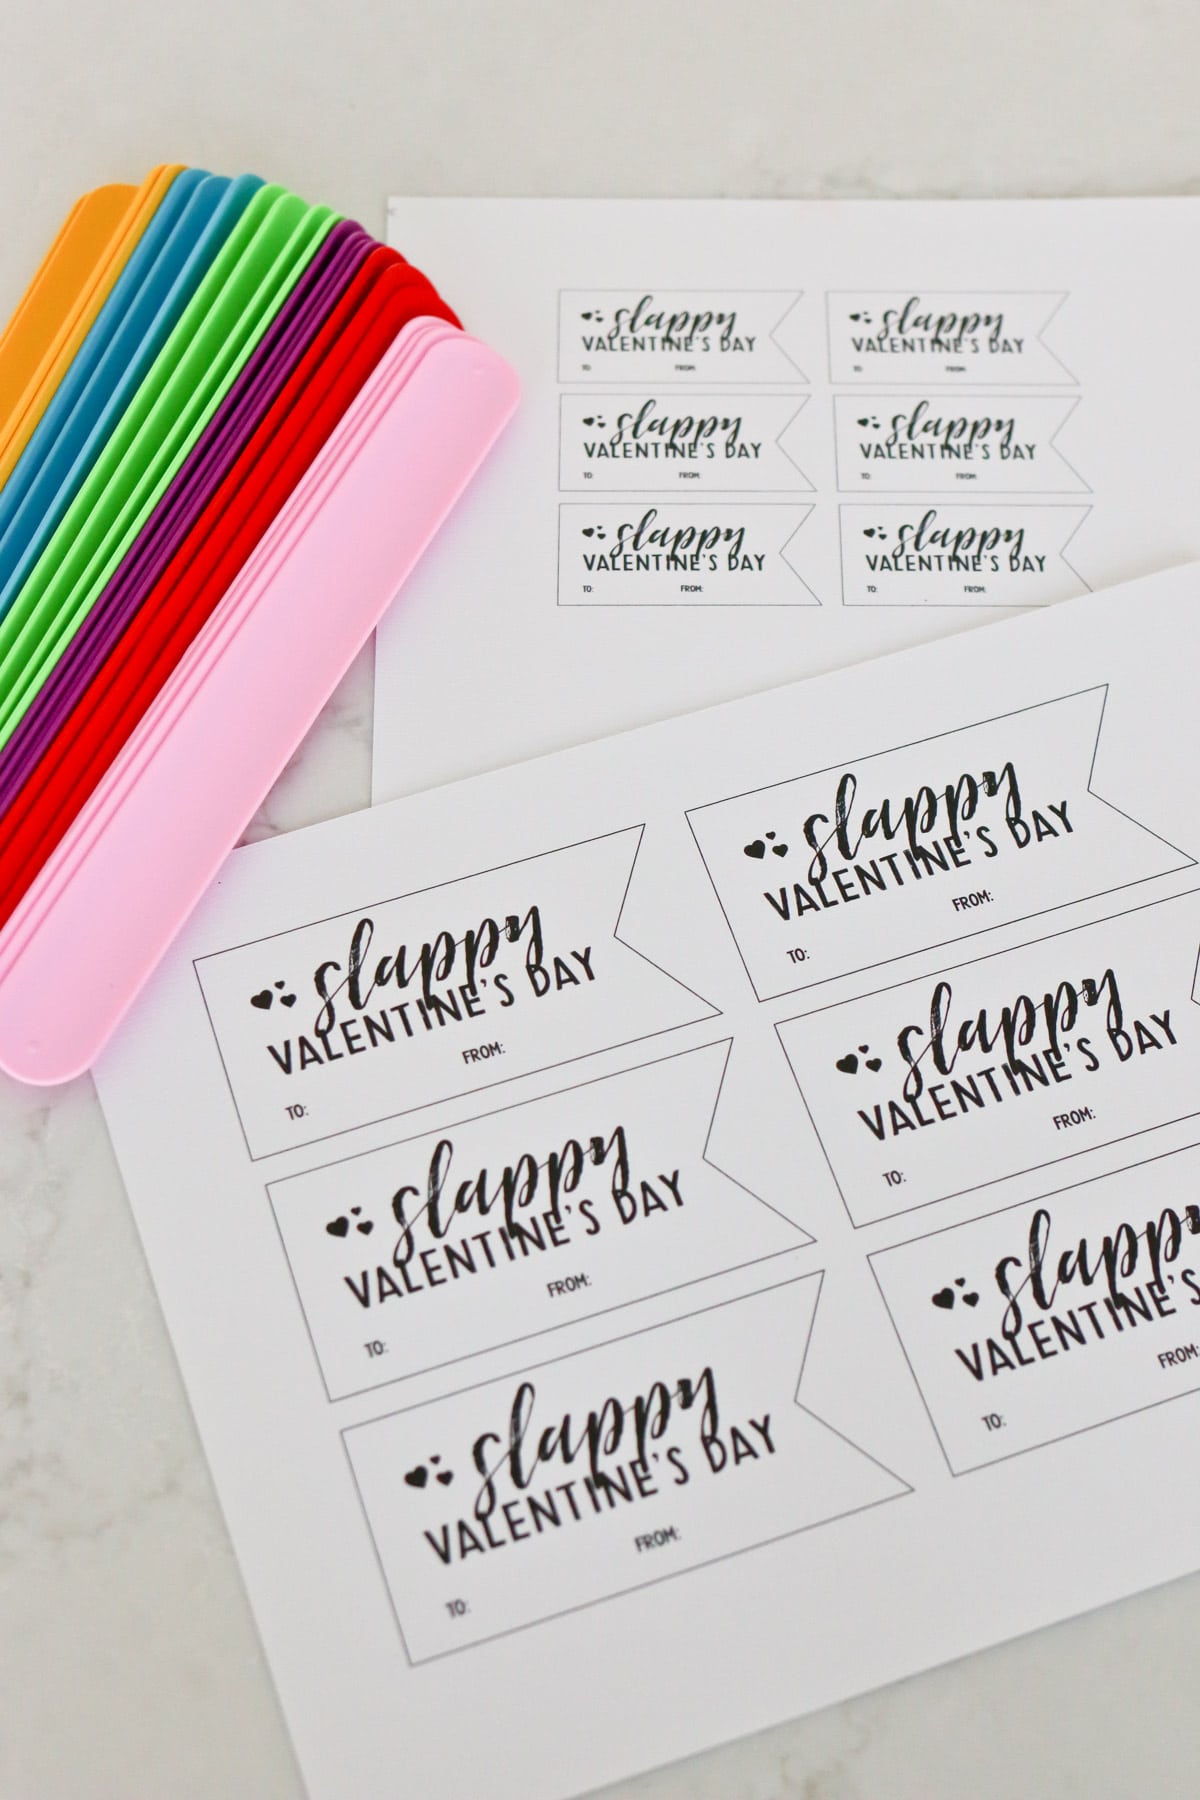 Slappy Valentines Day - Free printable for a non candy class valentines.